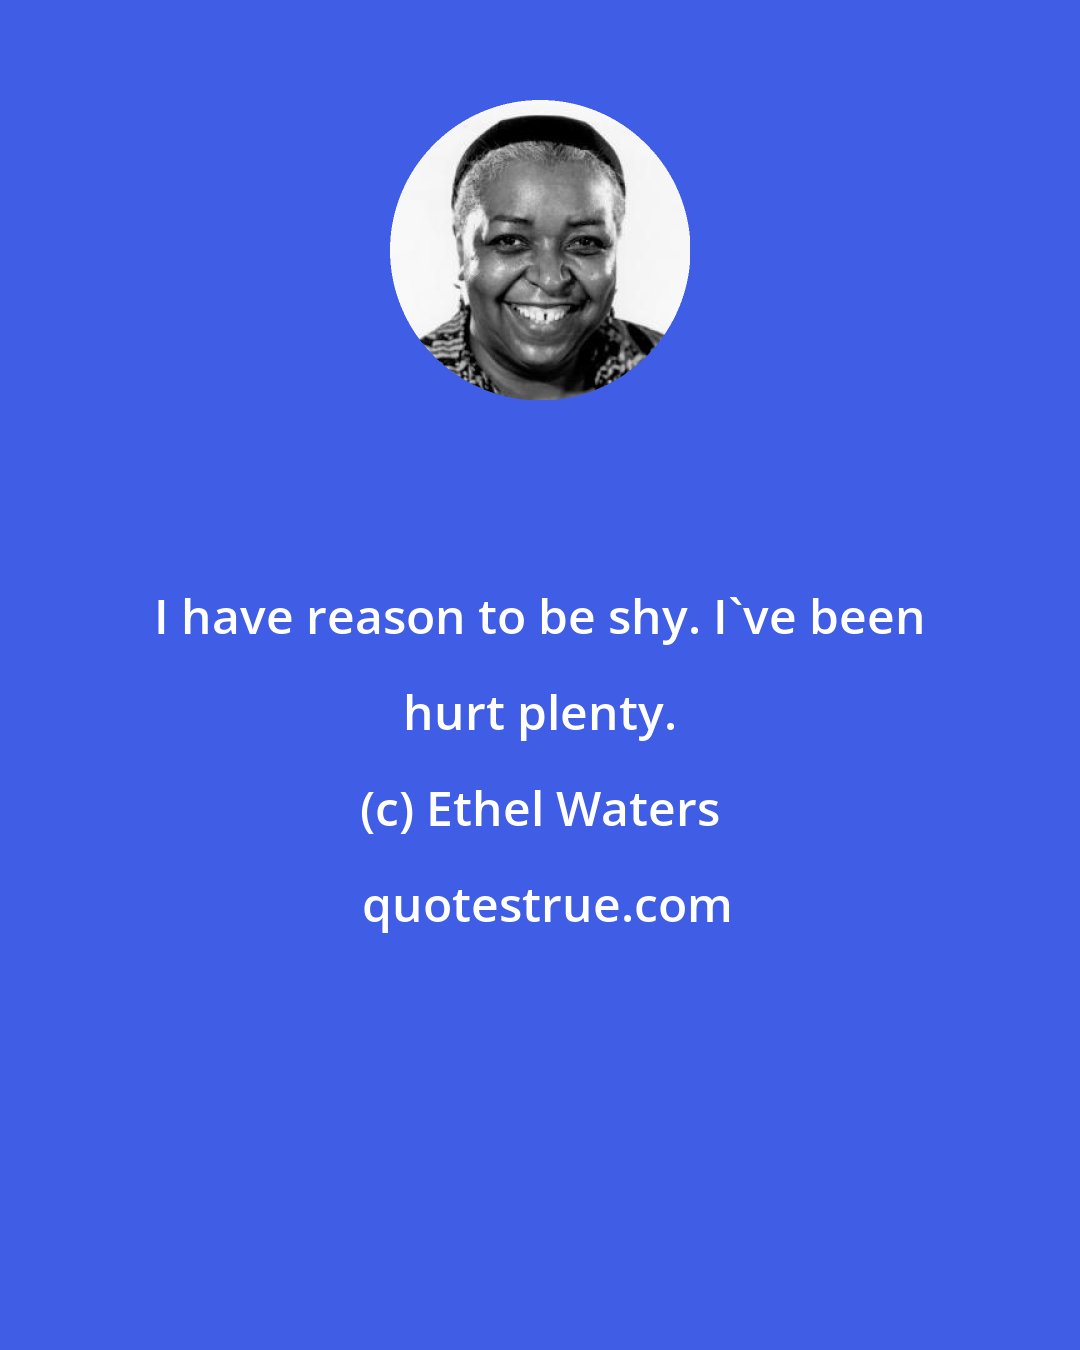 Ethel Waters: I have reason to be shy. I've been hurt plenty.